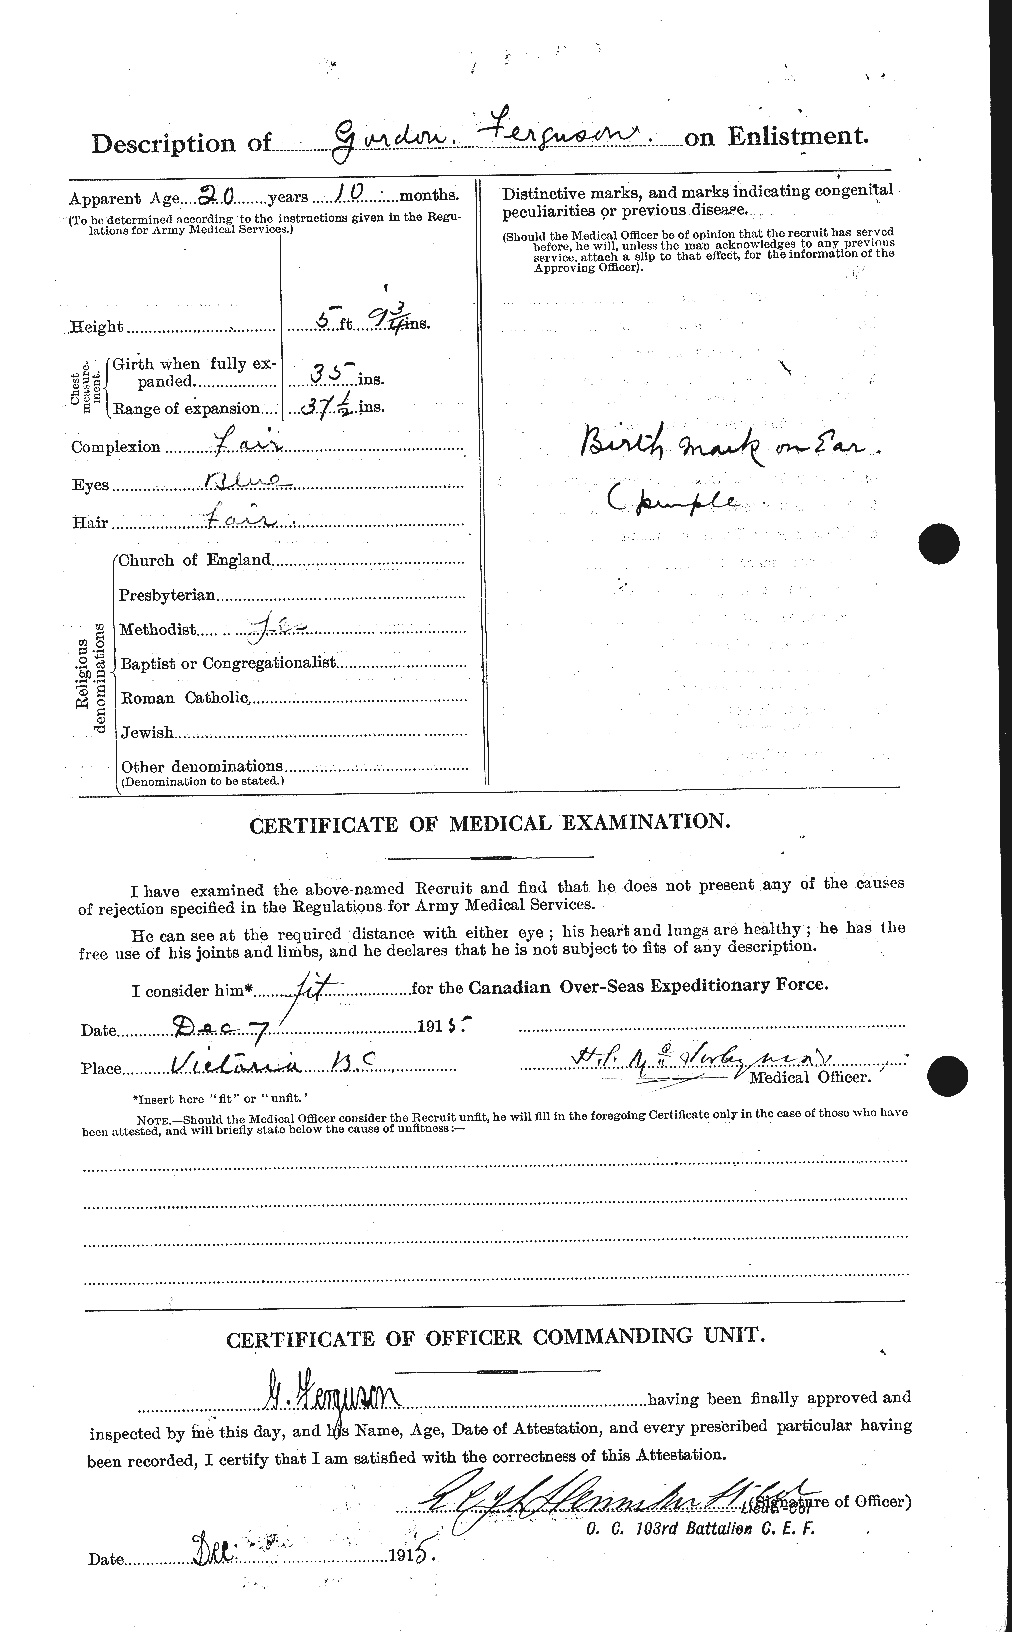 Personnel Records of the First World War - CEF 320153b